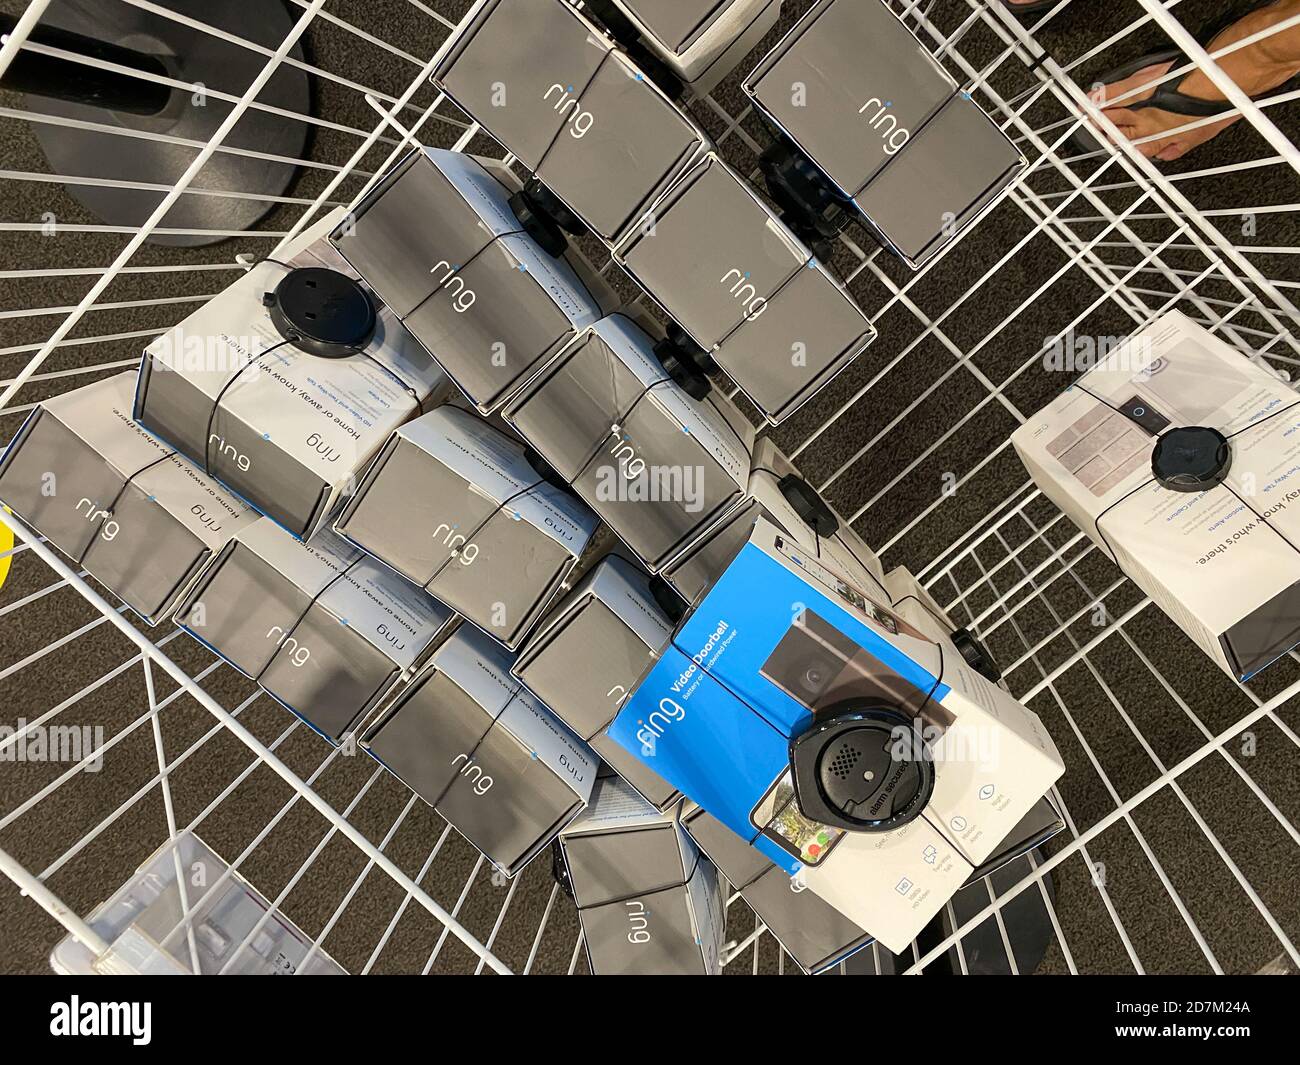 Orlando,FL/USA-10/14/20: A bin of Ring doorbell for sale at a Best Buy chain retail electronics store. Stock Photo